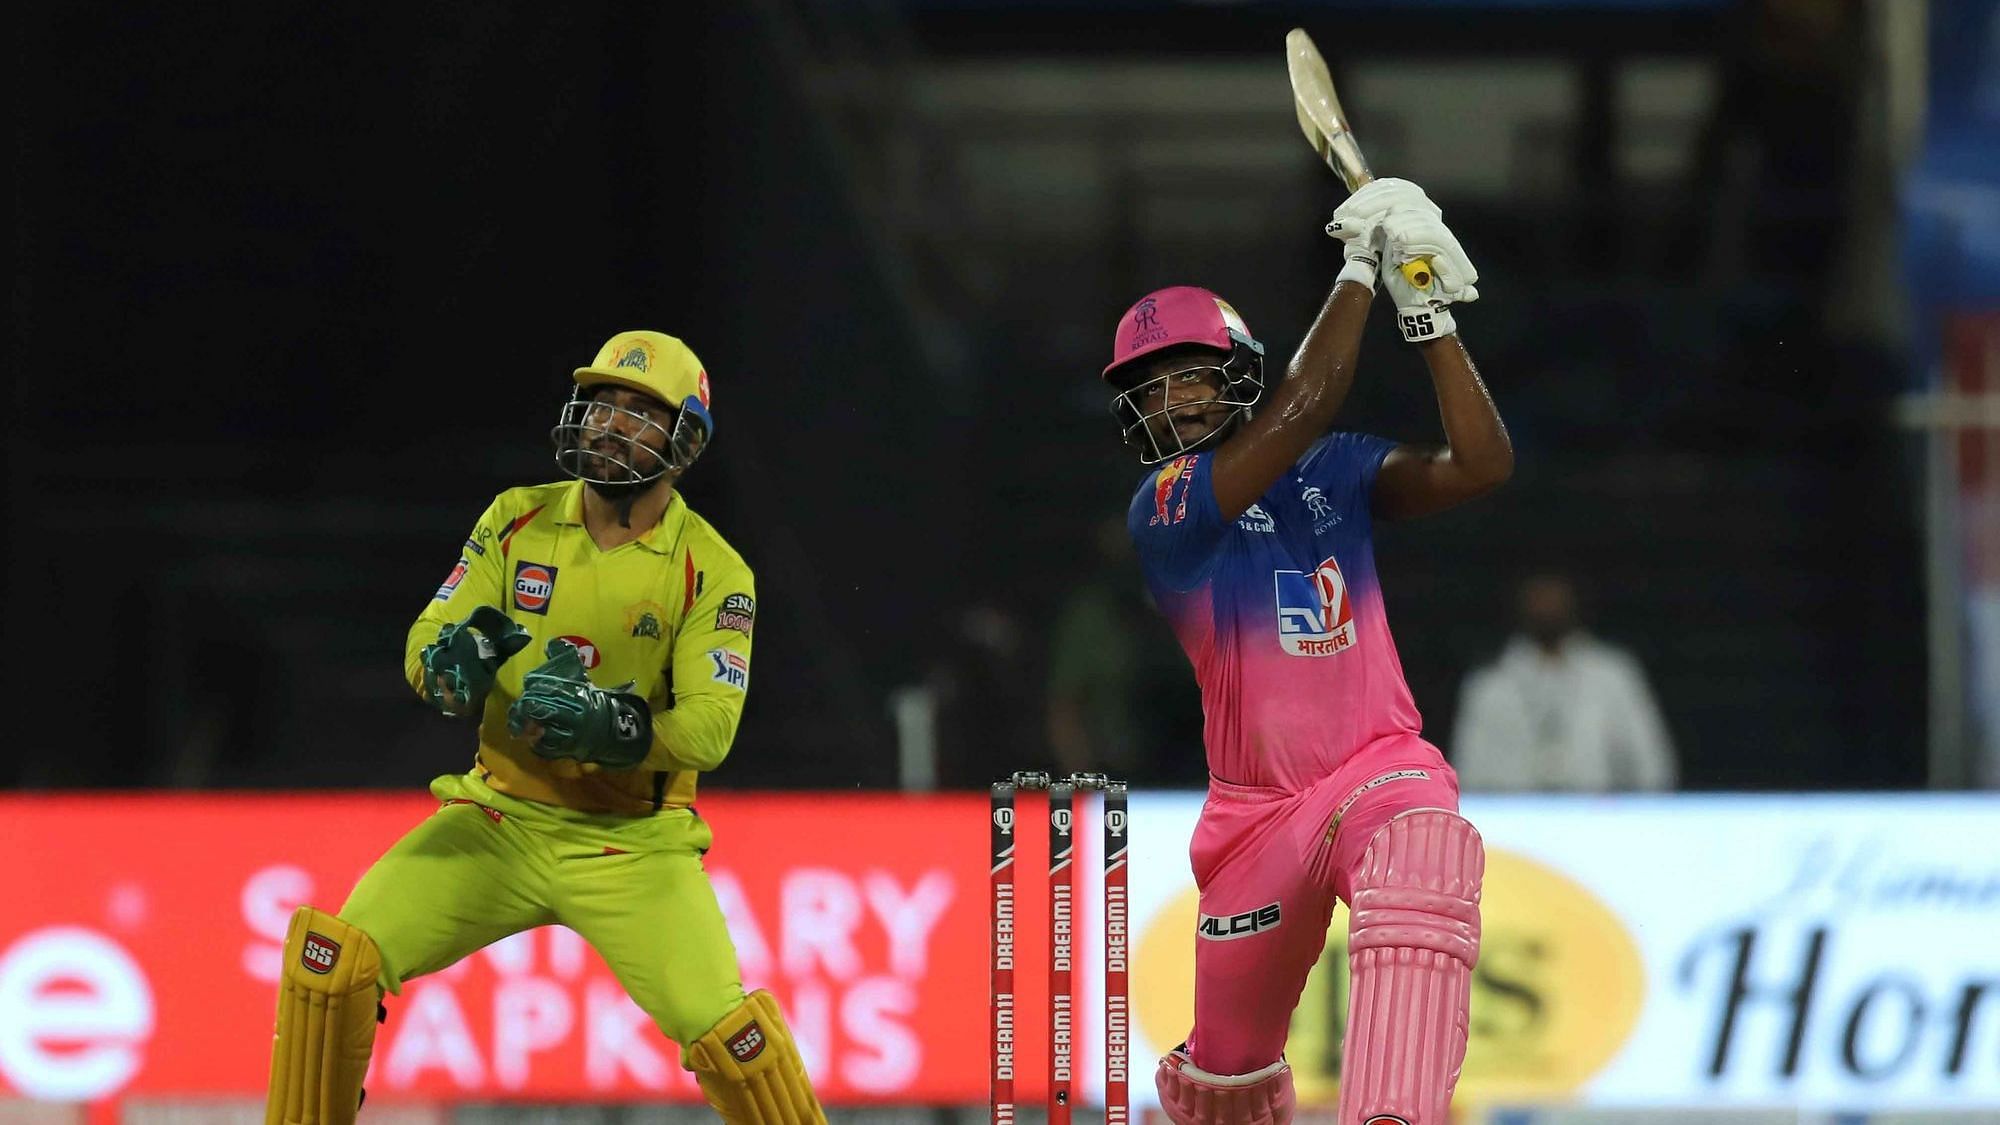 Rajasthan Royals’ Sanju Samson was in sublime touch on Tuesday, as he smashed 74 runs off just 32 balls